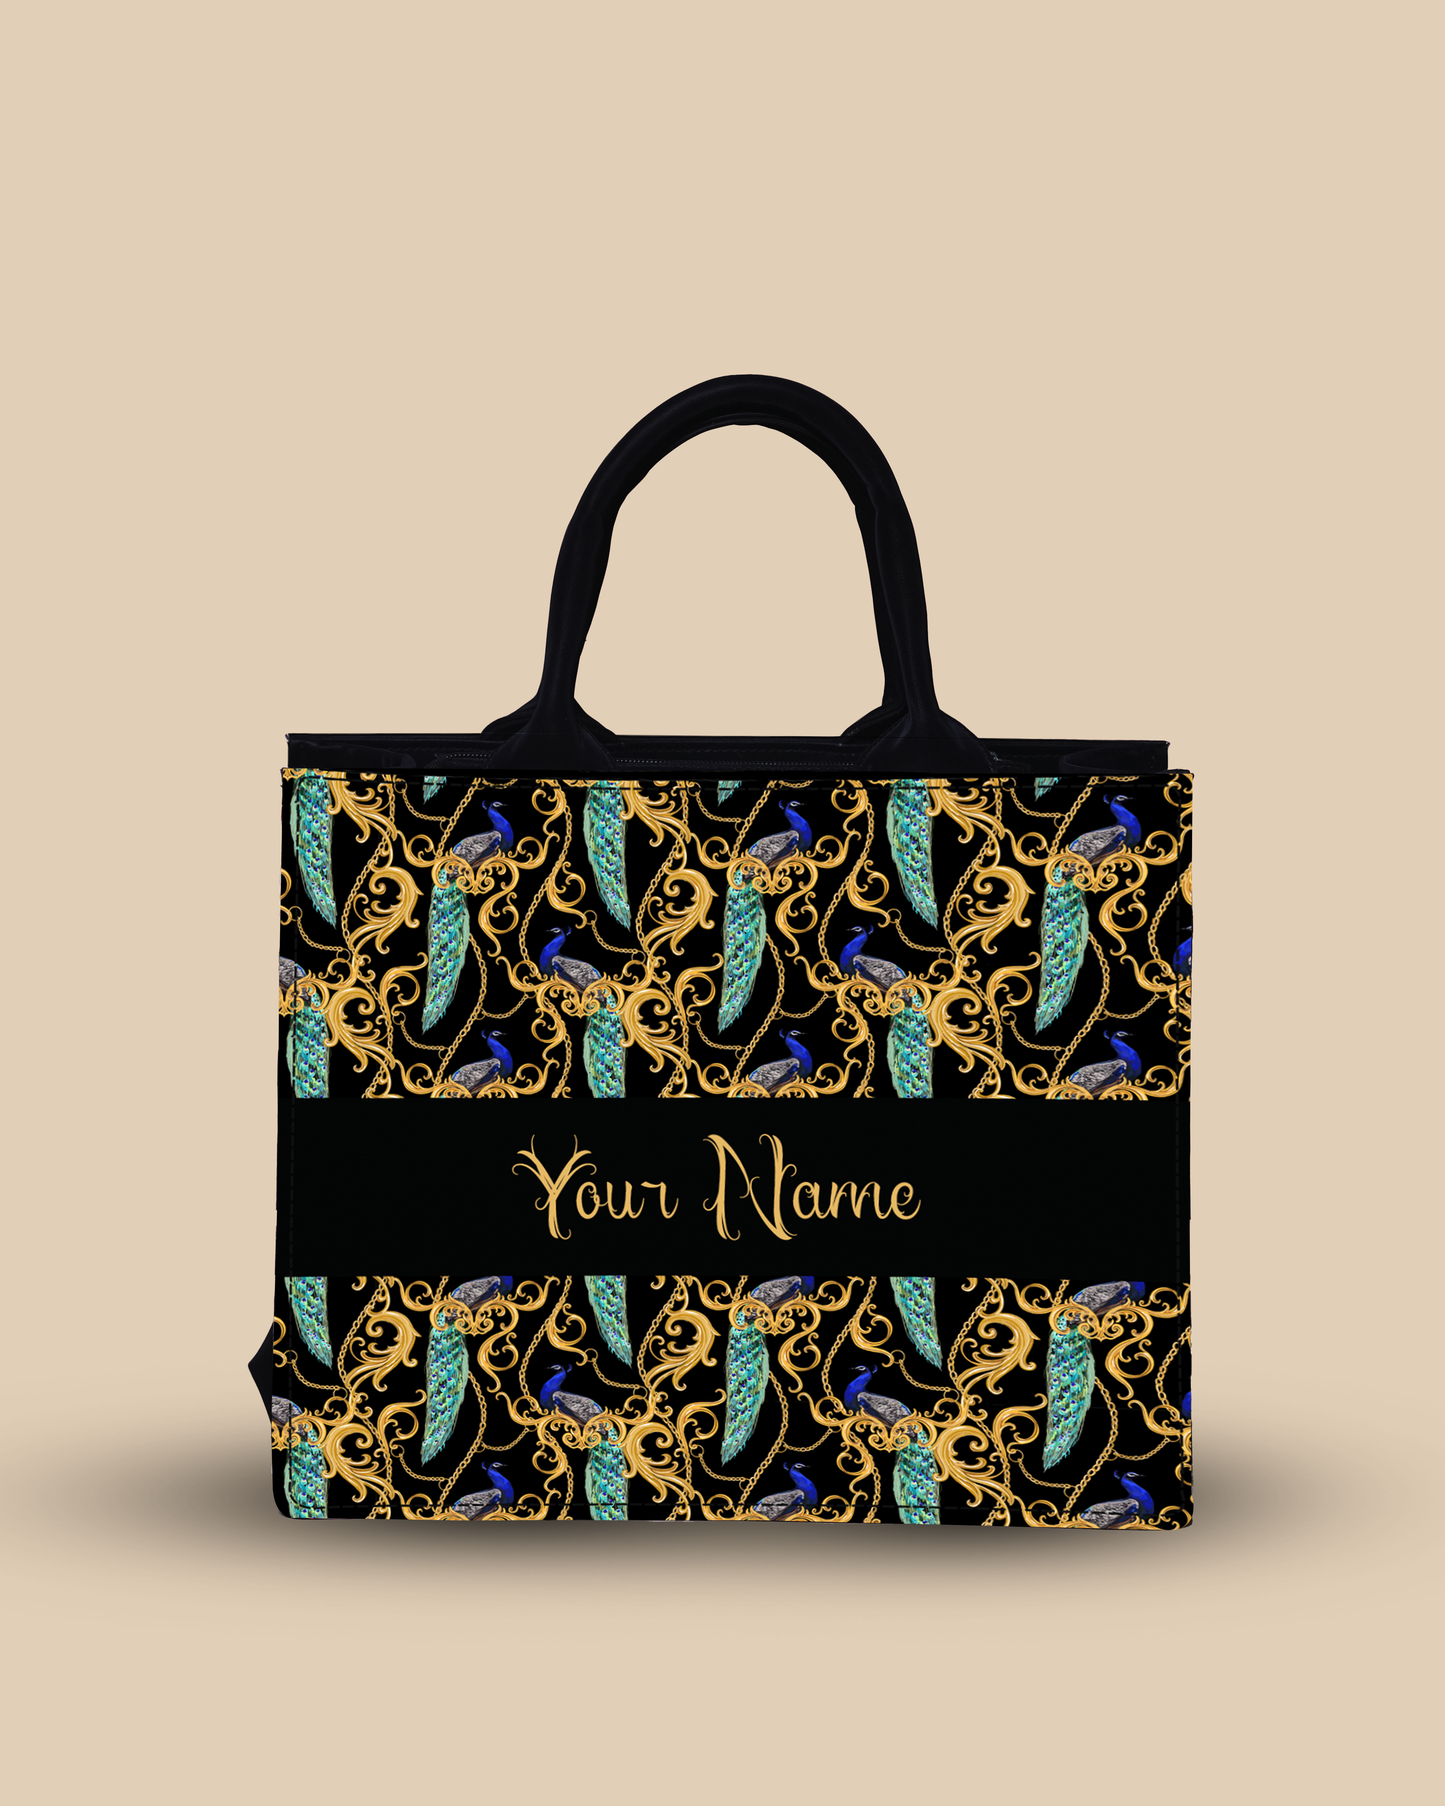 Personalized Small Tote Bag Designed With Peacock Clutch Solid Black